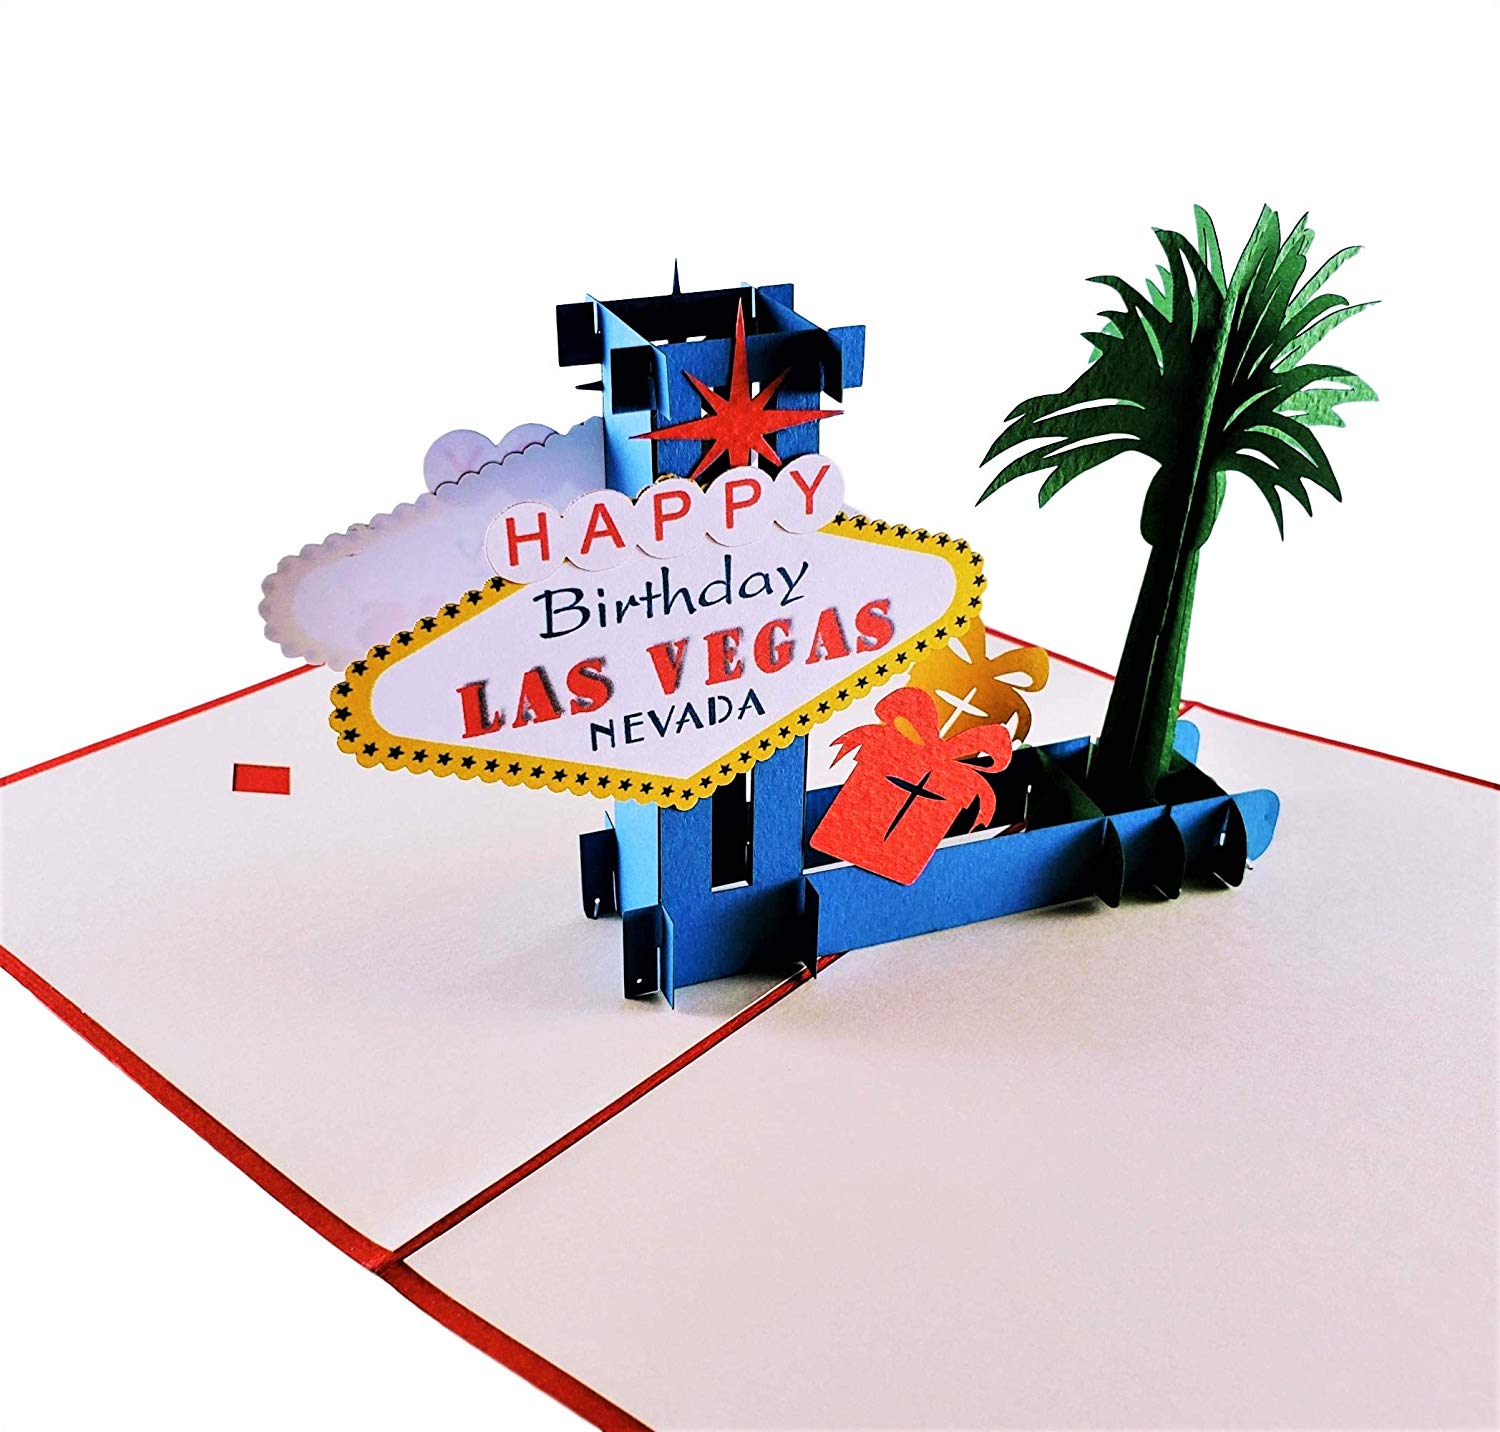 Happy Birthday Red Cover Las Vegas 3D Pop Up Greeting Card - Birthday - iGifts And Cards